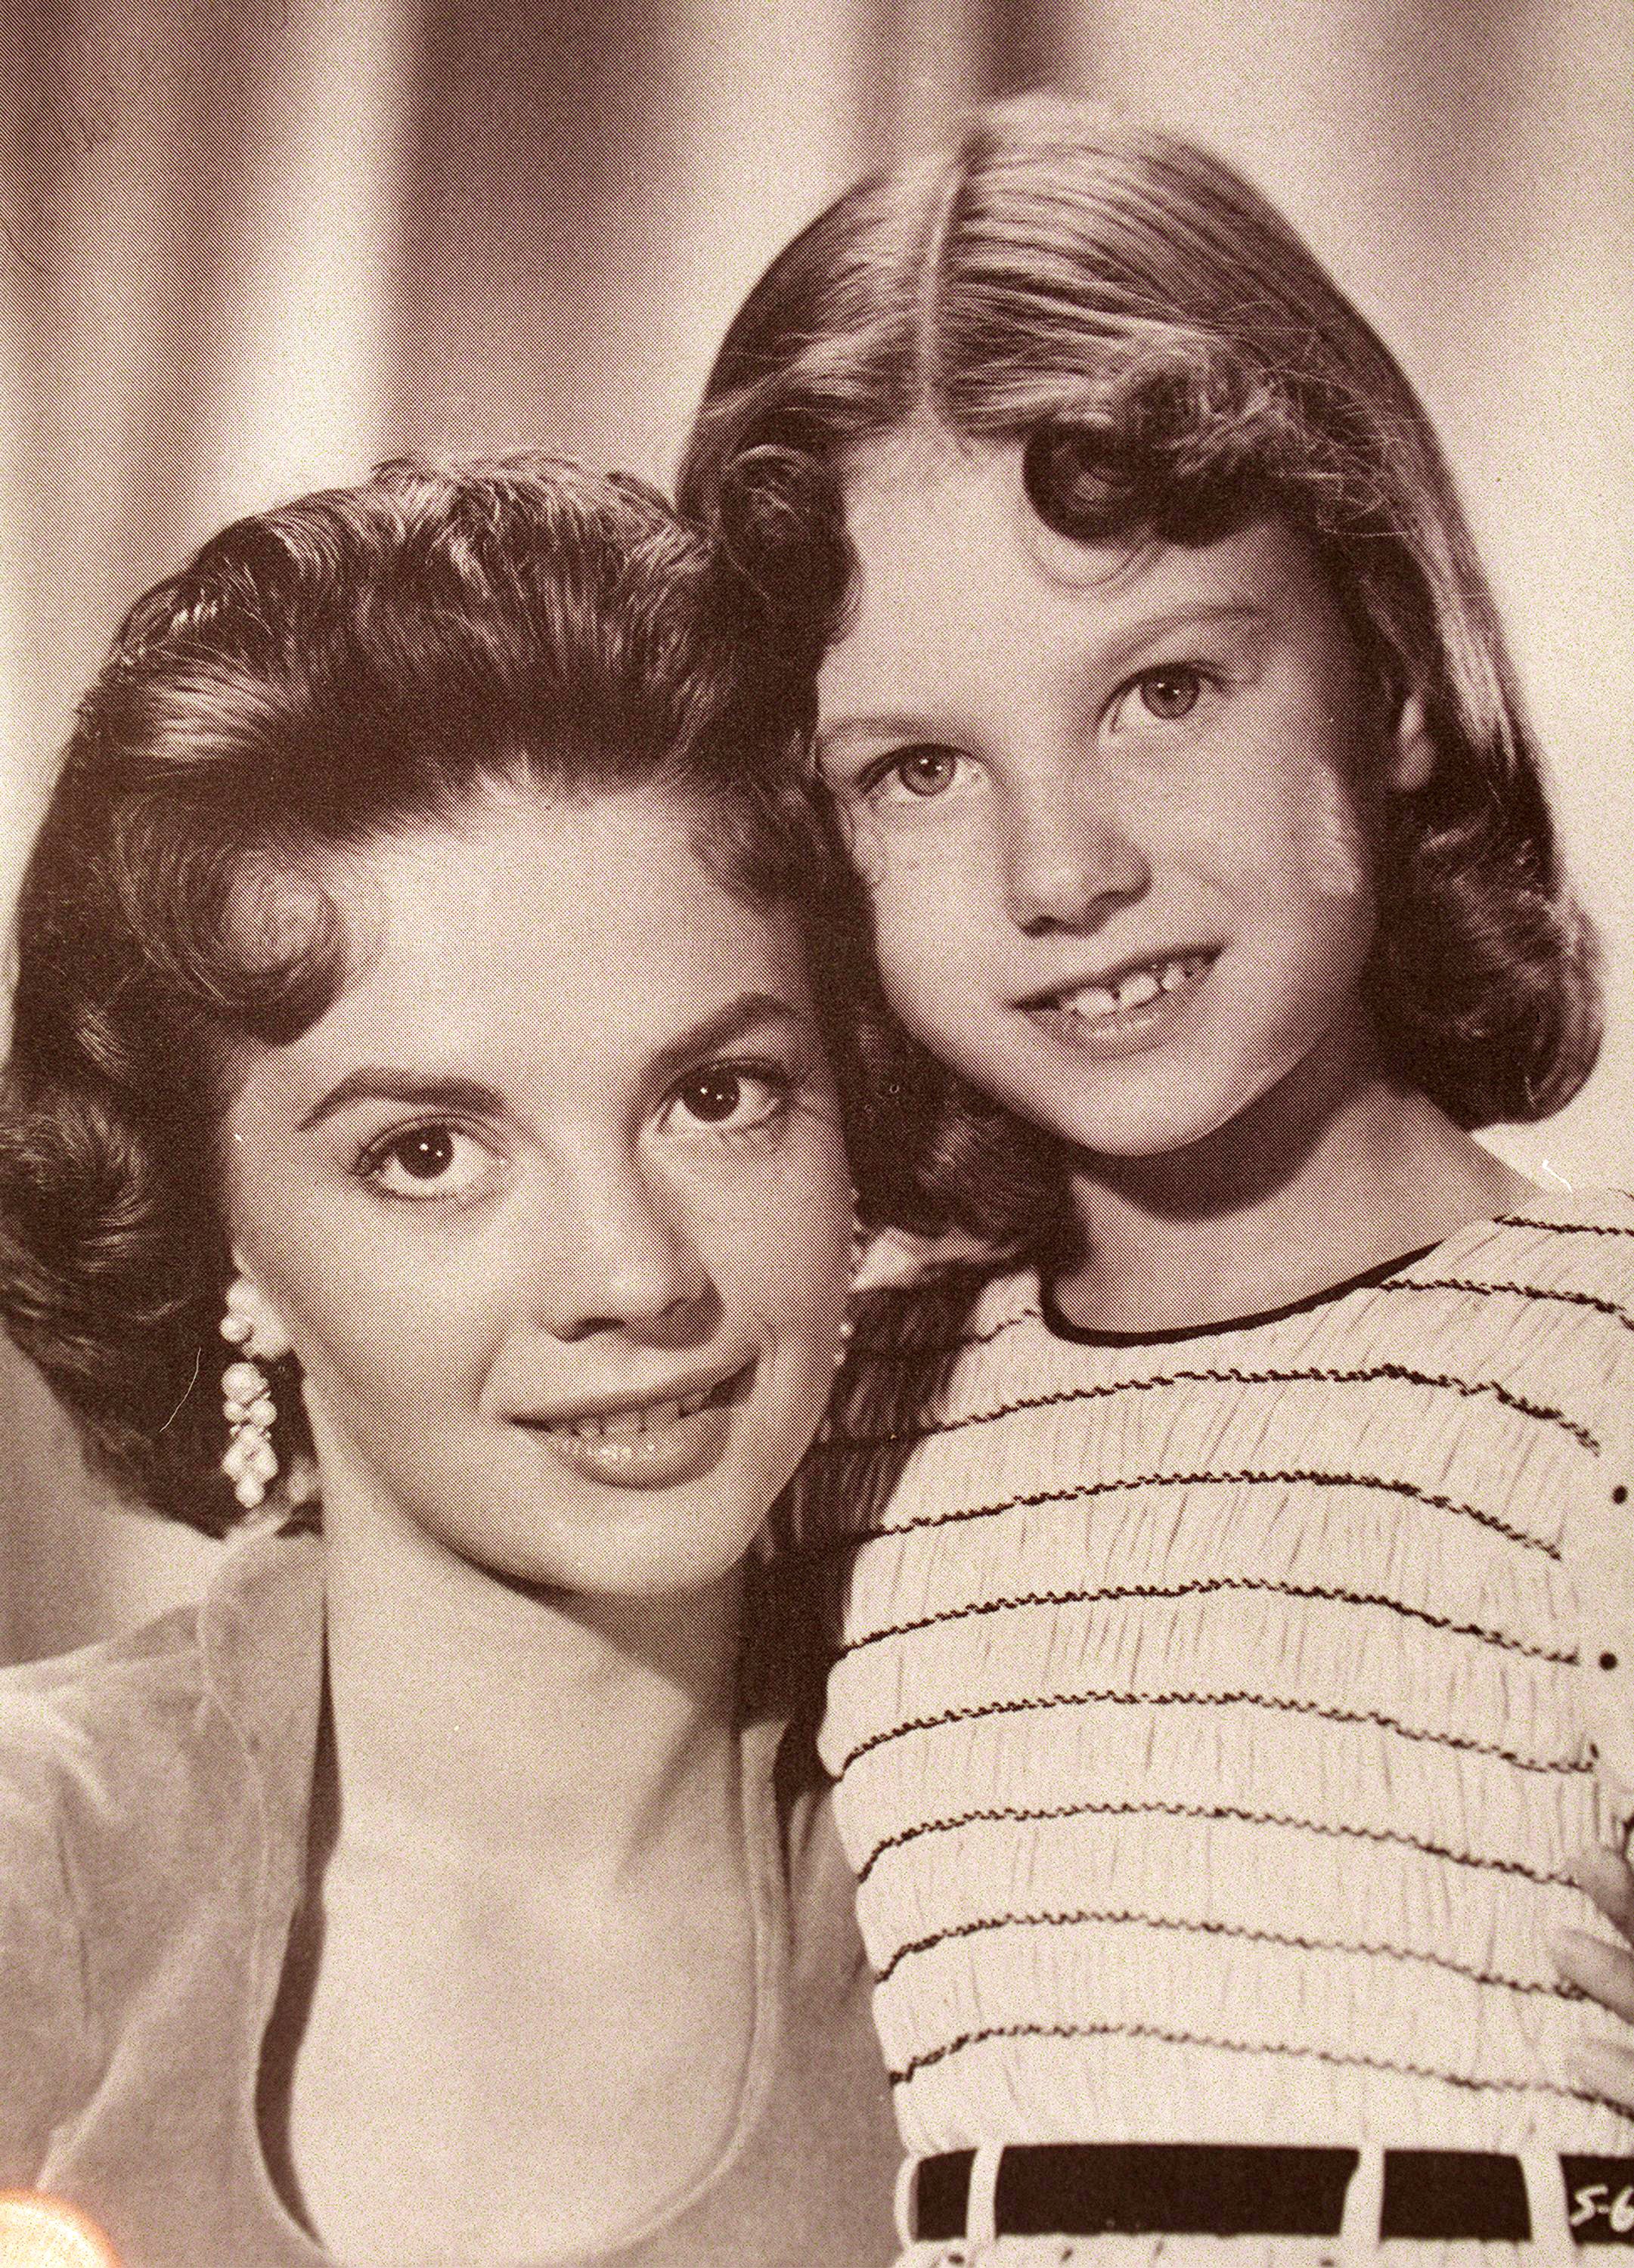 Lana Wood (right) with her sister Natalie Wood (left)